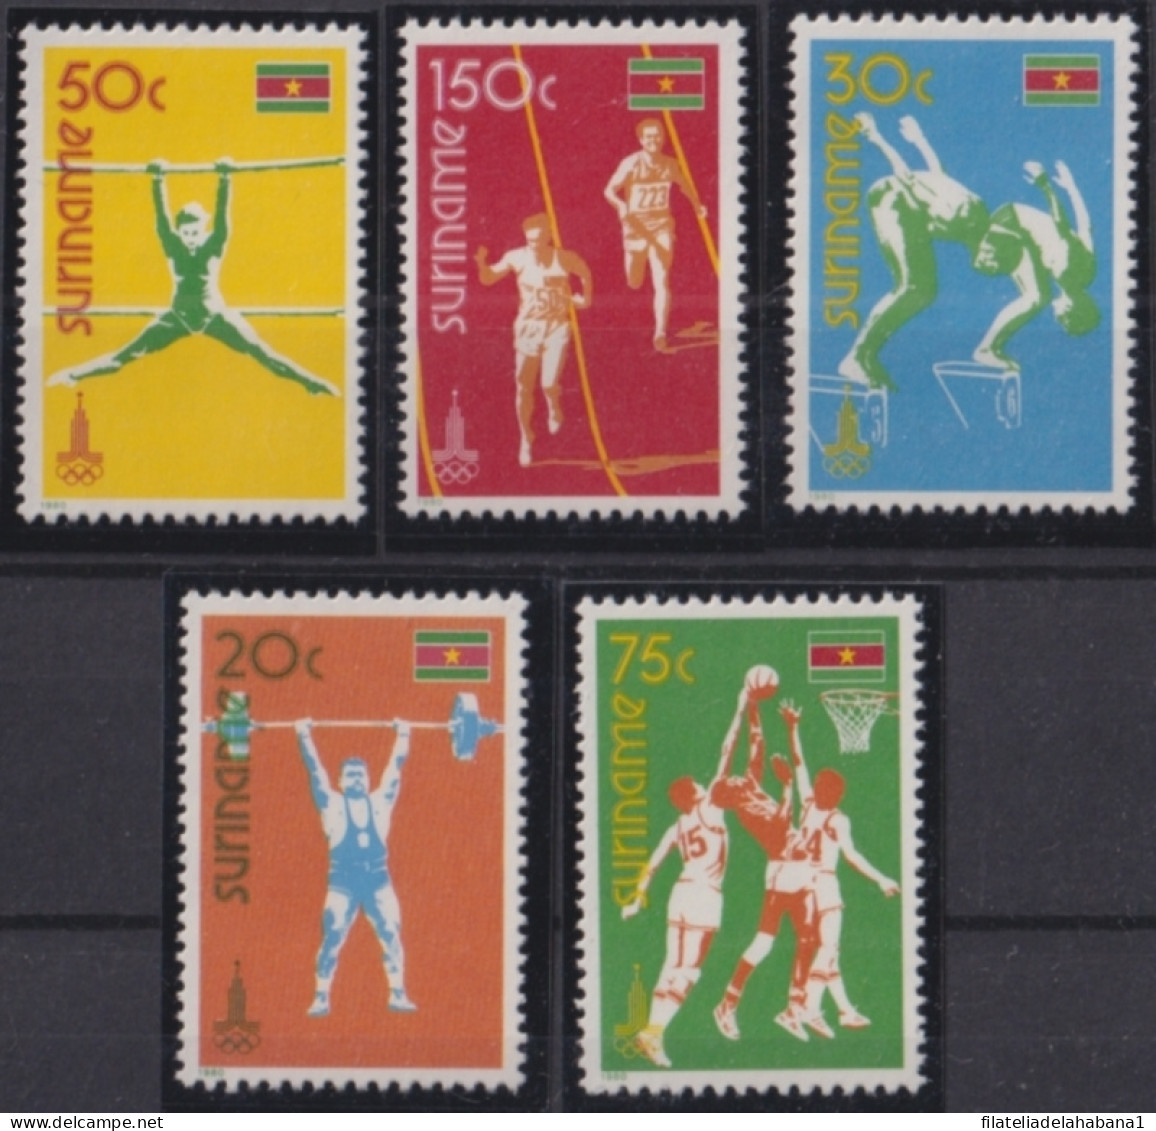 F-EX50224 SURINAME MNH 1980 OLYMPIC GAMES MOSCOW ATHLETISM SWIMMING BASKET.  - Sommer 1980: Moskau